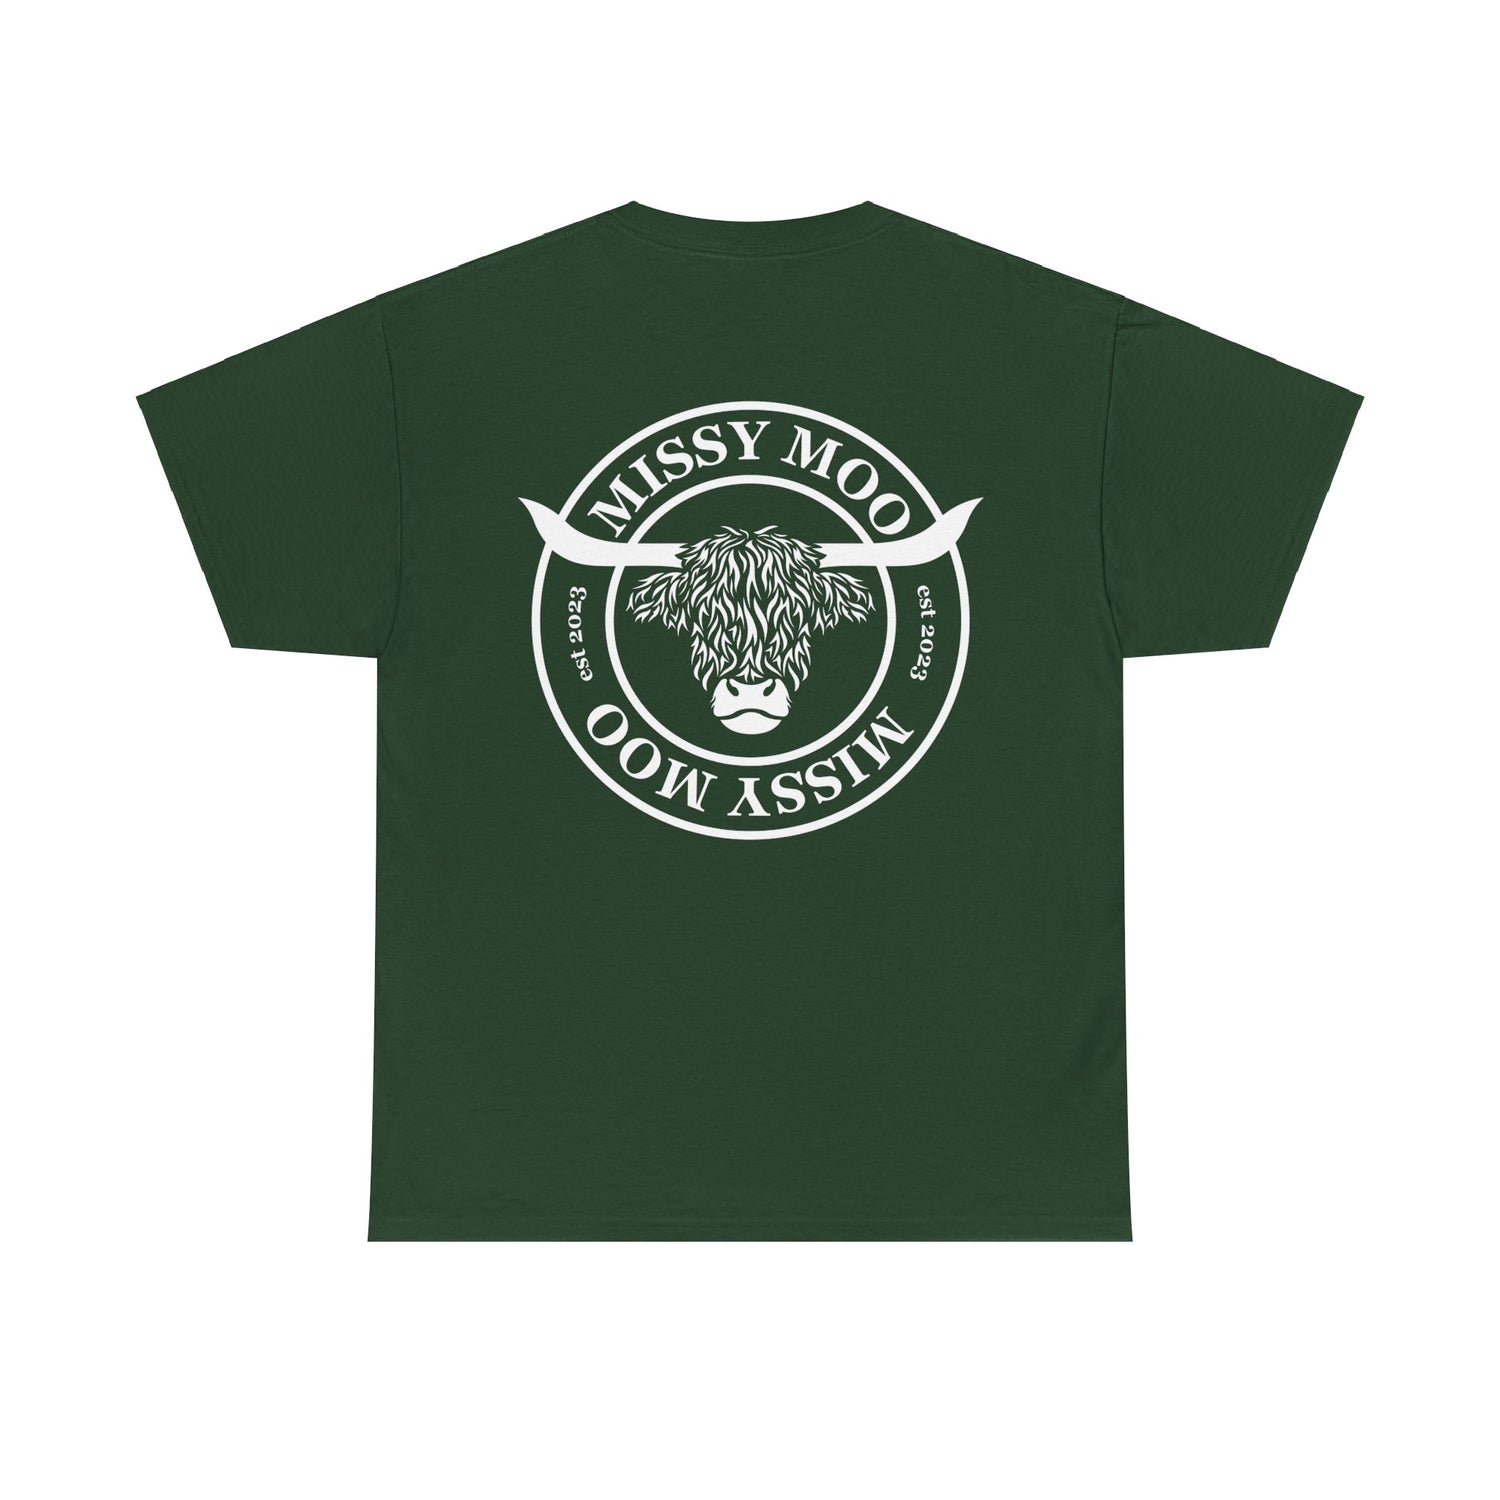 Classic Ladies Tee - Forest Green